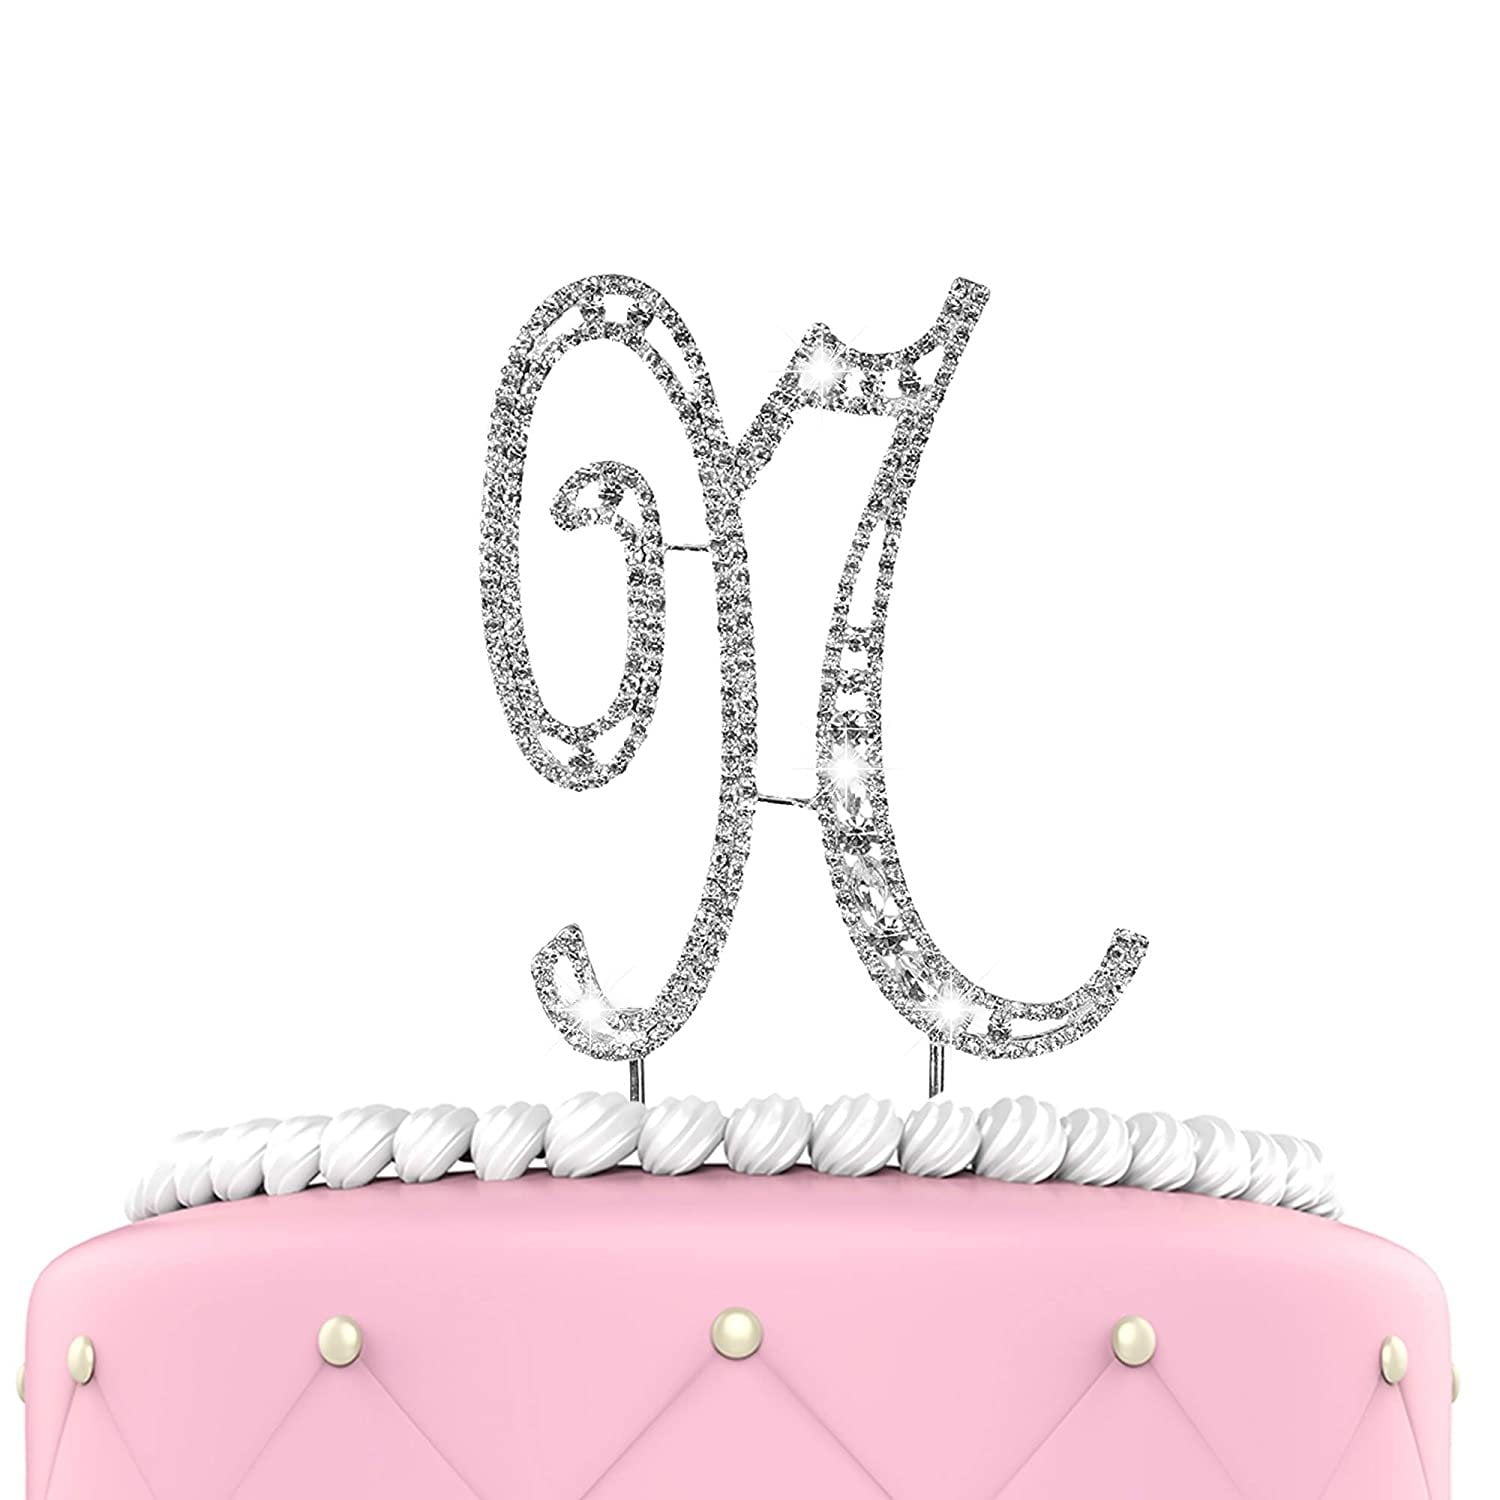 Small Crystal Rhinestone Silver Letter A to Z Monogram Wedding Cake Topper 